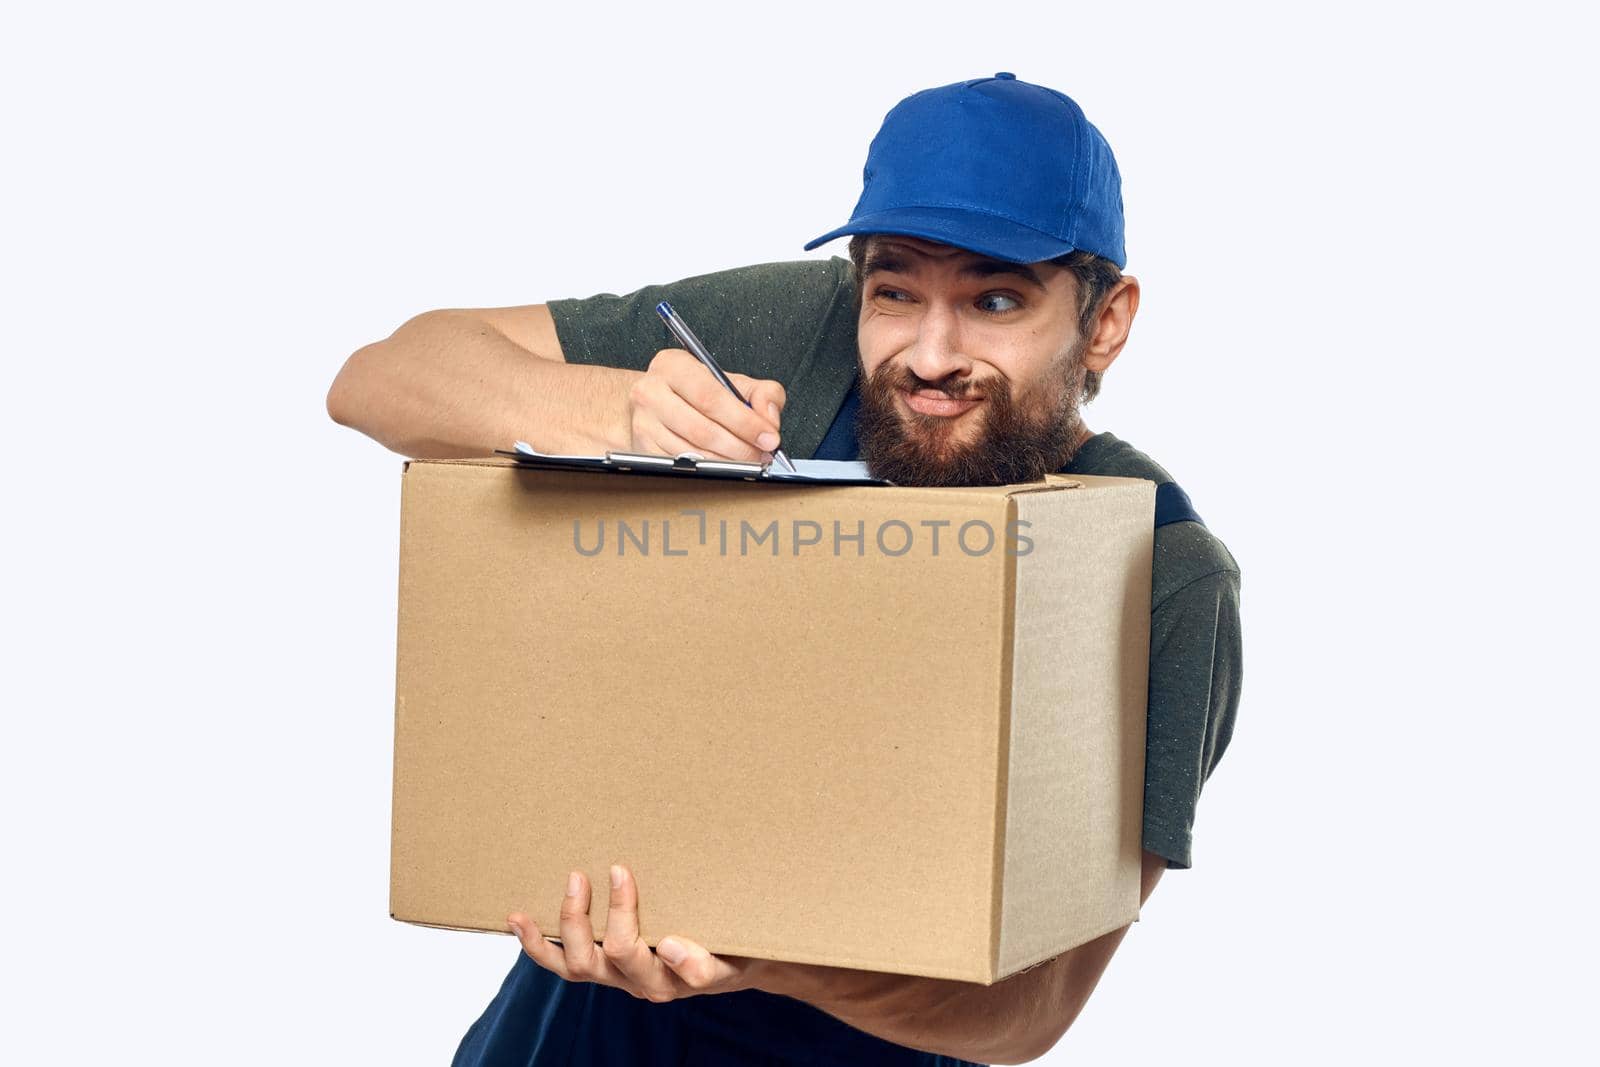 male working uniform box delivery by courier professional by SHOTPRIME